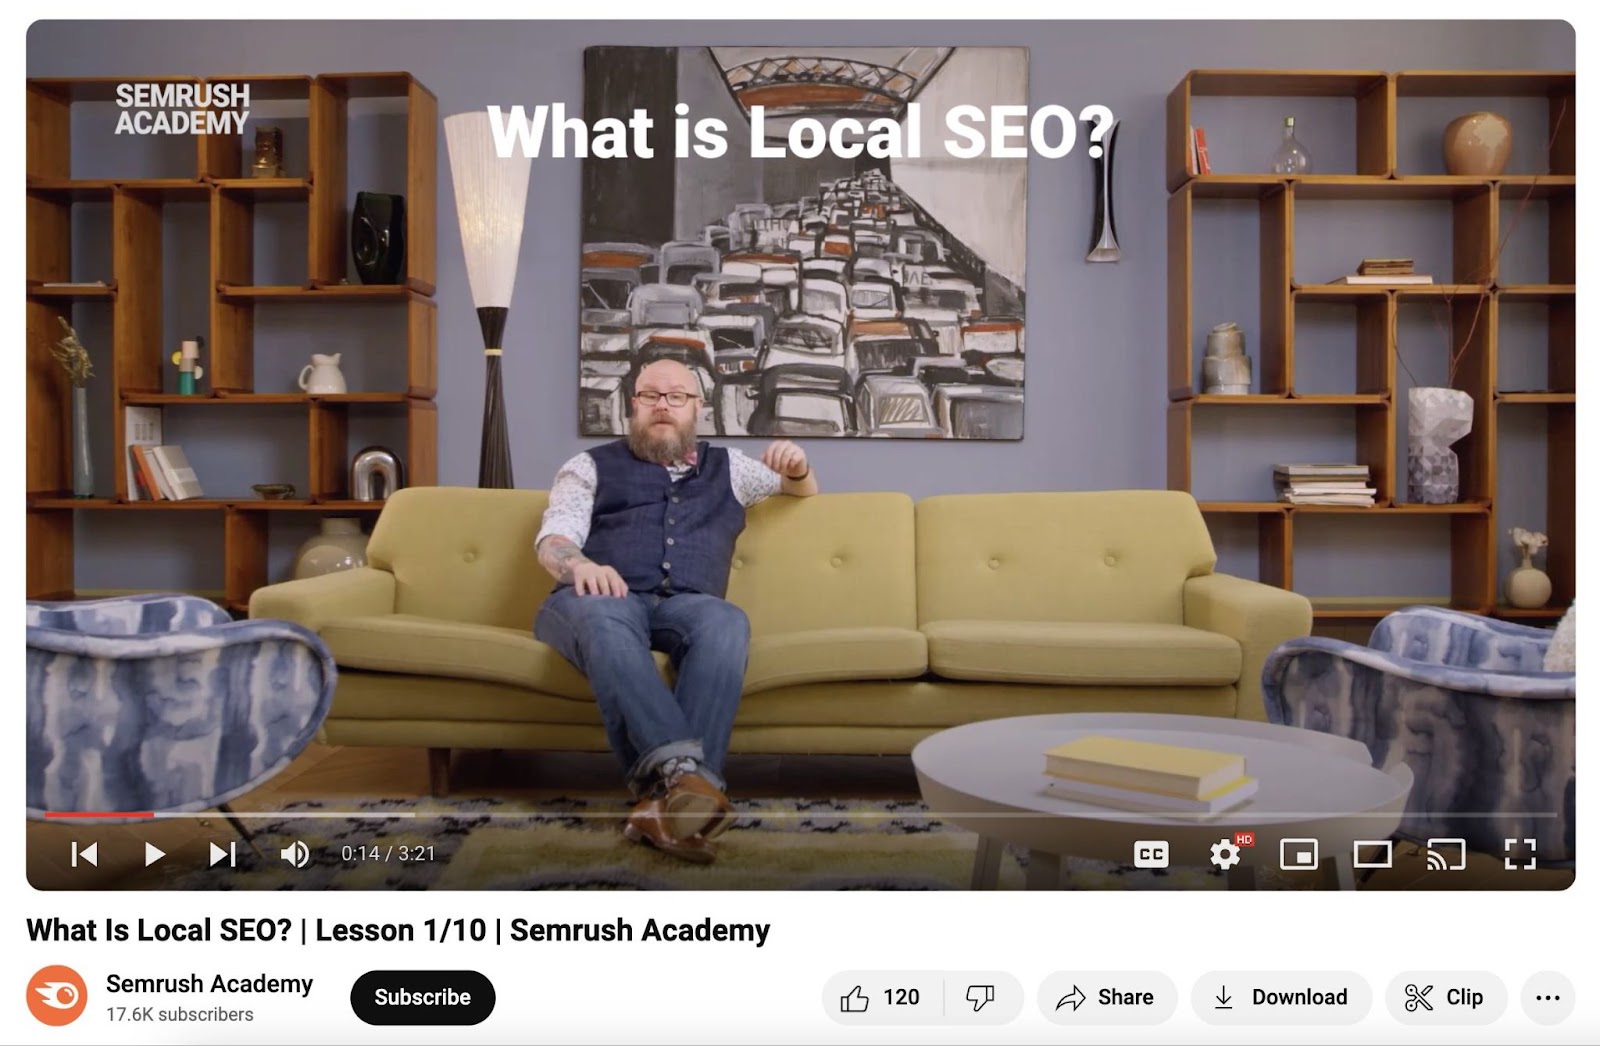 A screenshot from Semrush's "What is Local SEO" YouTube video